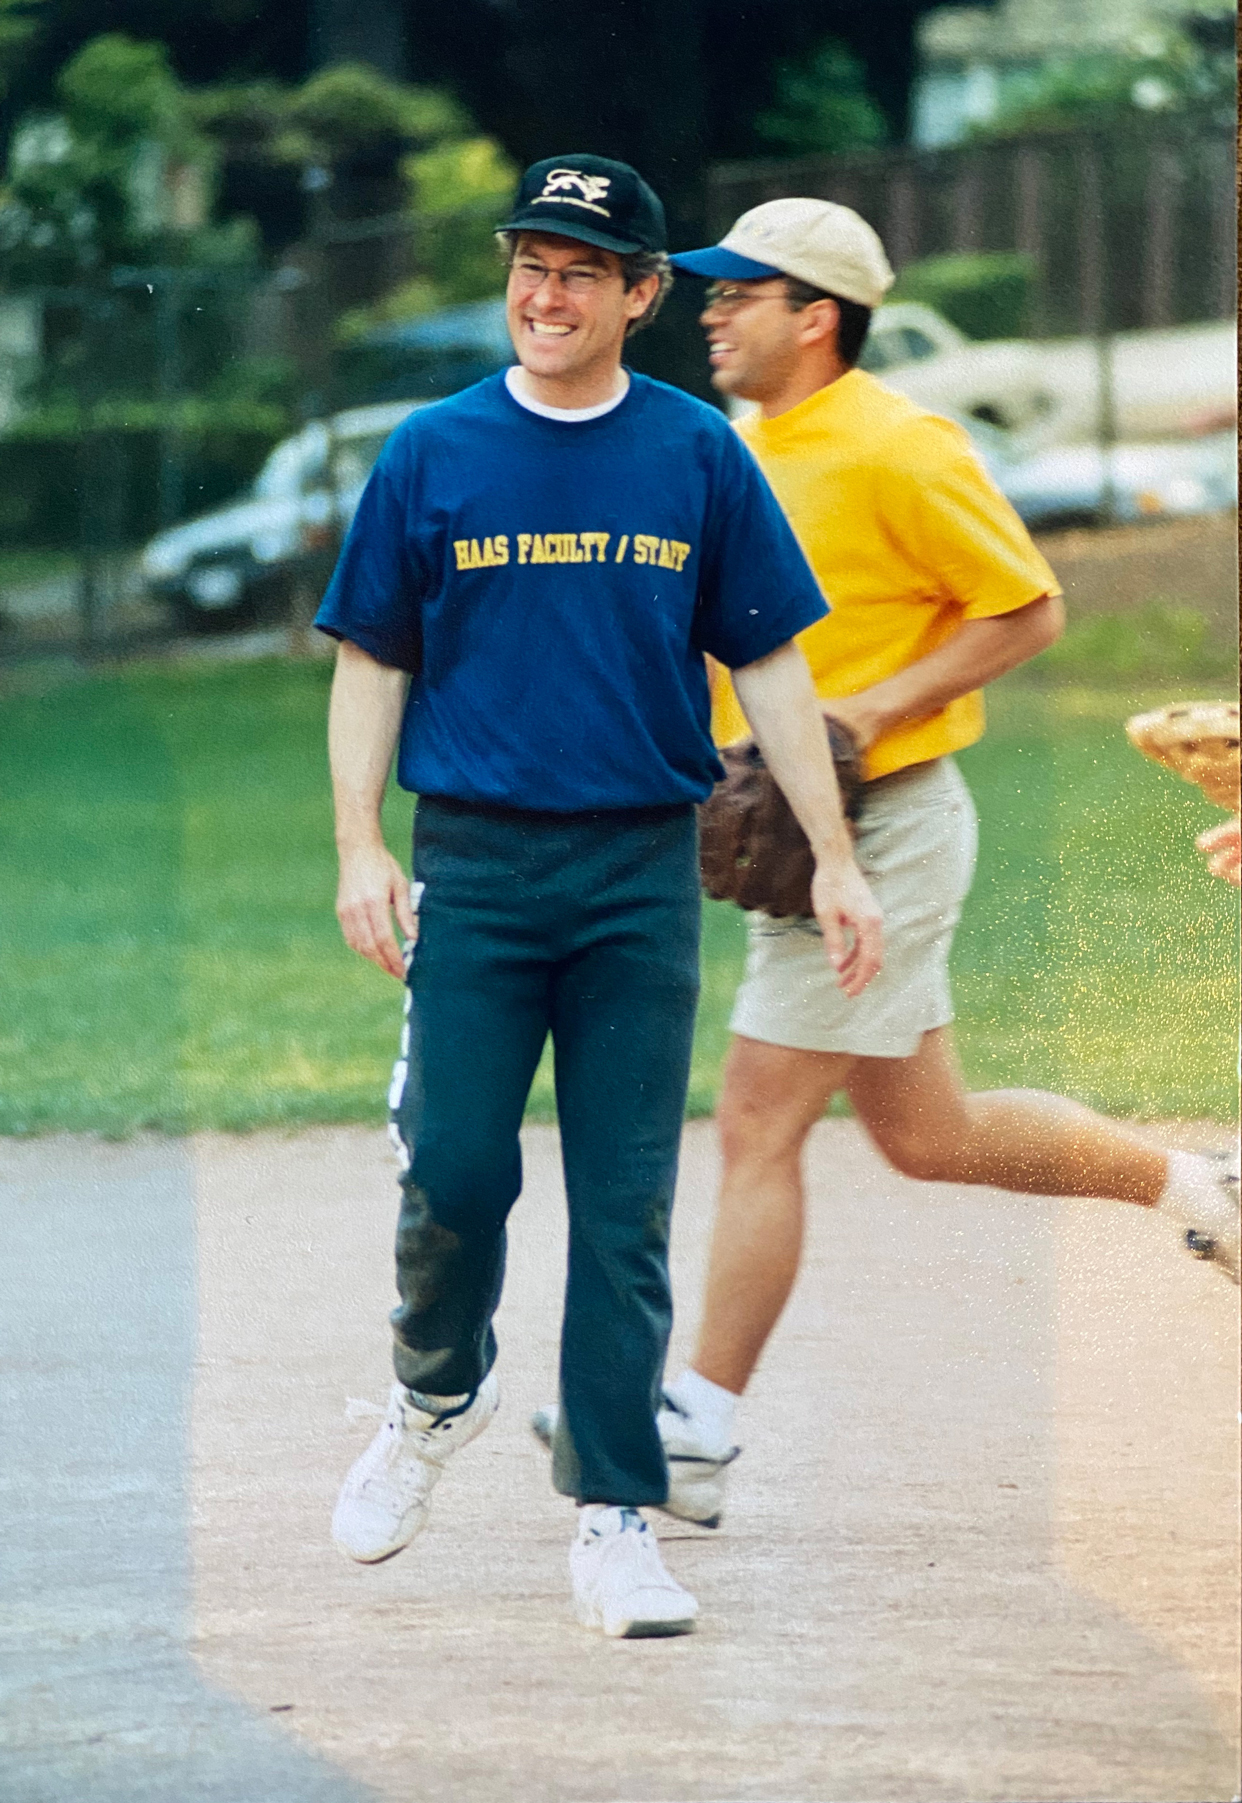 Two men on a softball field in a photo from the 90s